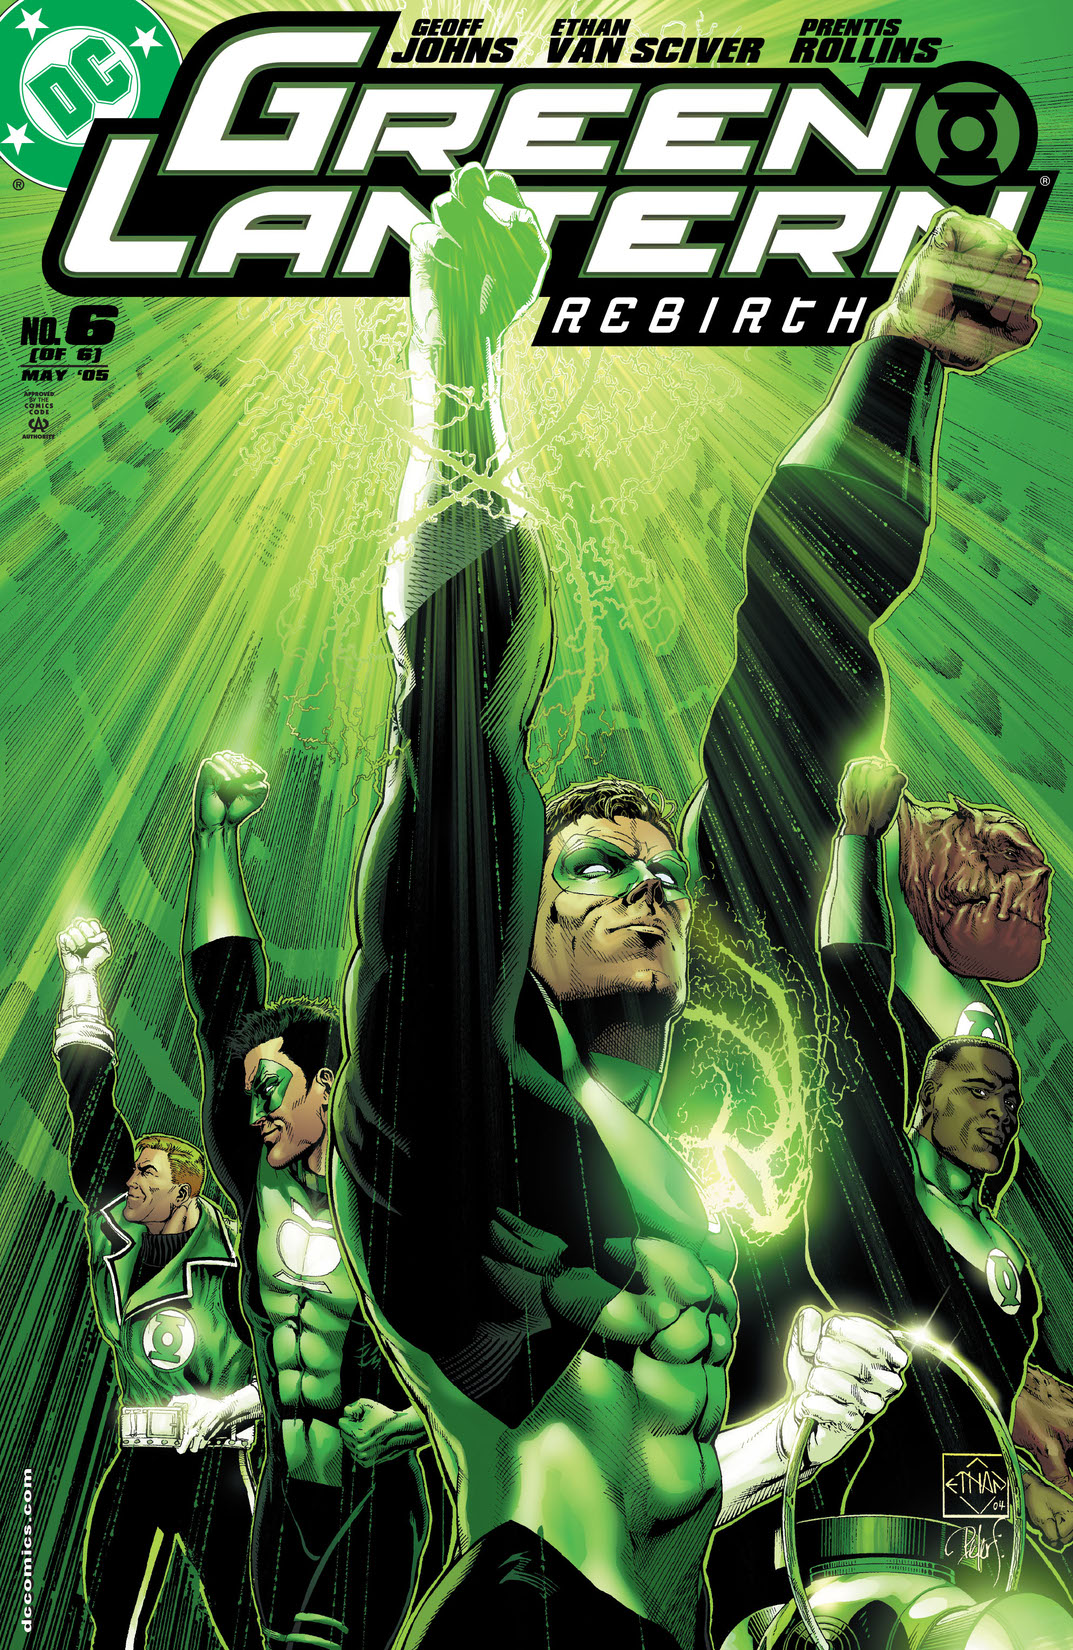 Green Lantern: Rebirth #6 preview images